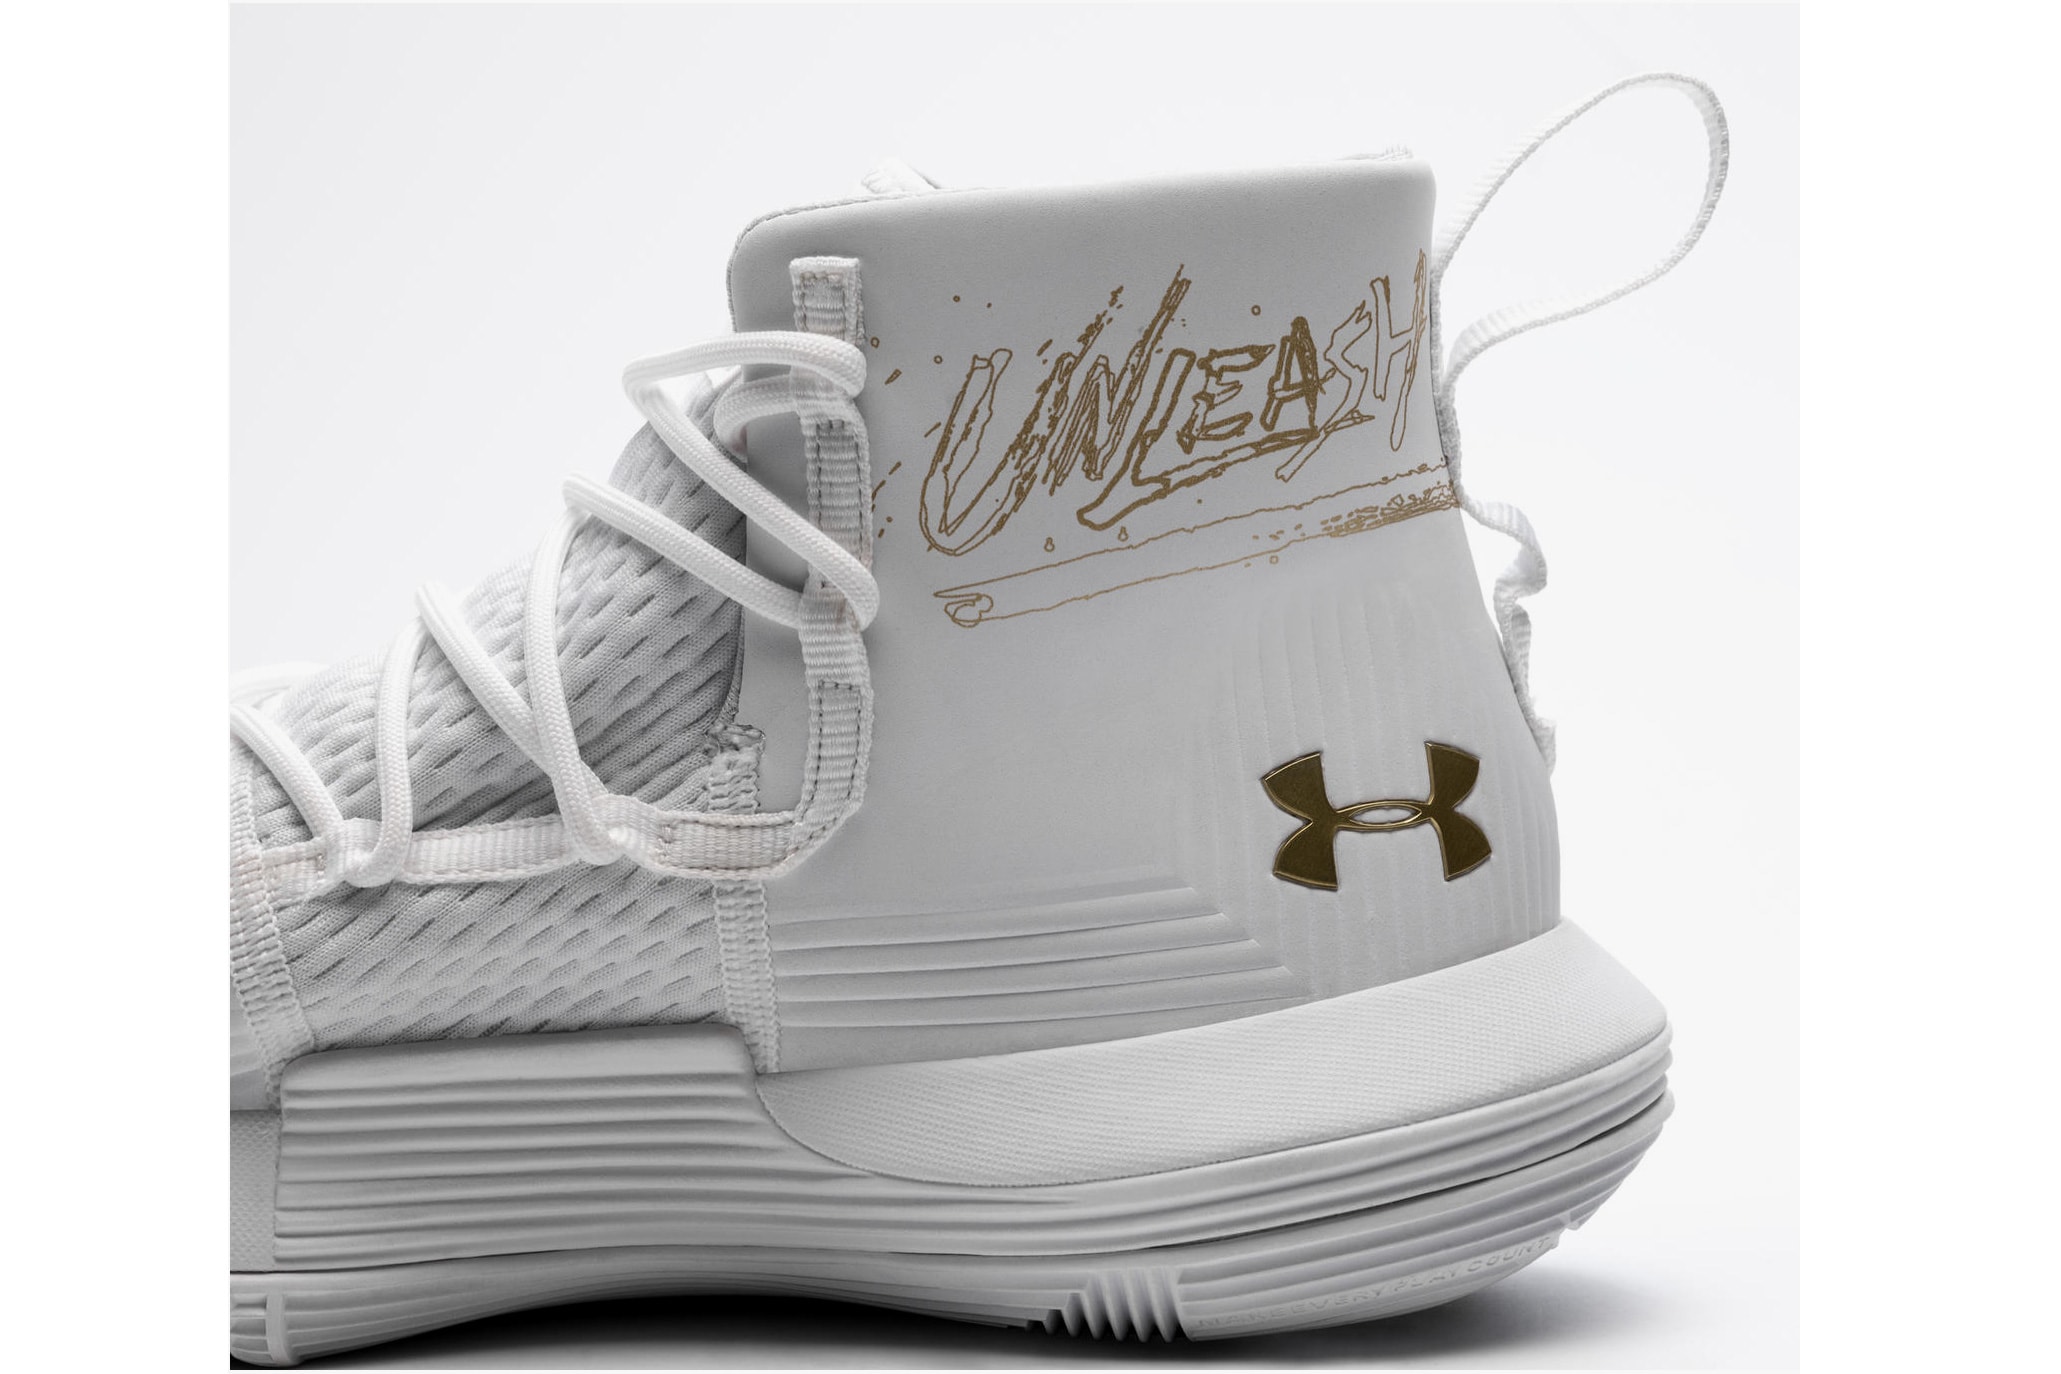 Under Armour 2019 NCAA Tournament Colorways march madness basketball black white Curry 3Zero II Mid Anatomix Spawn